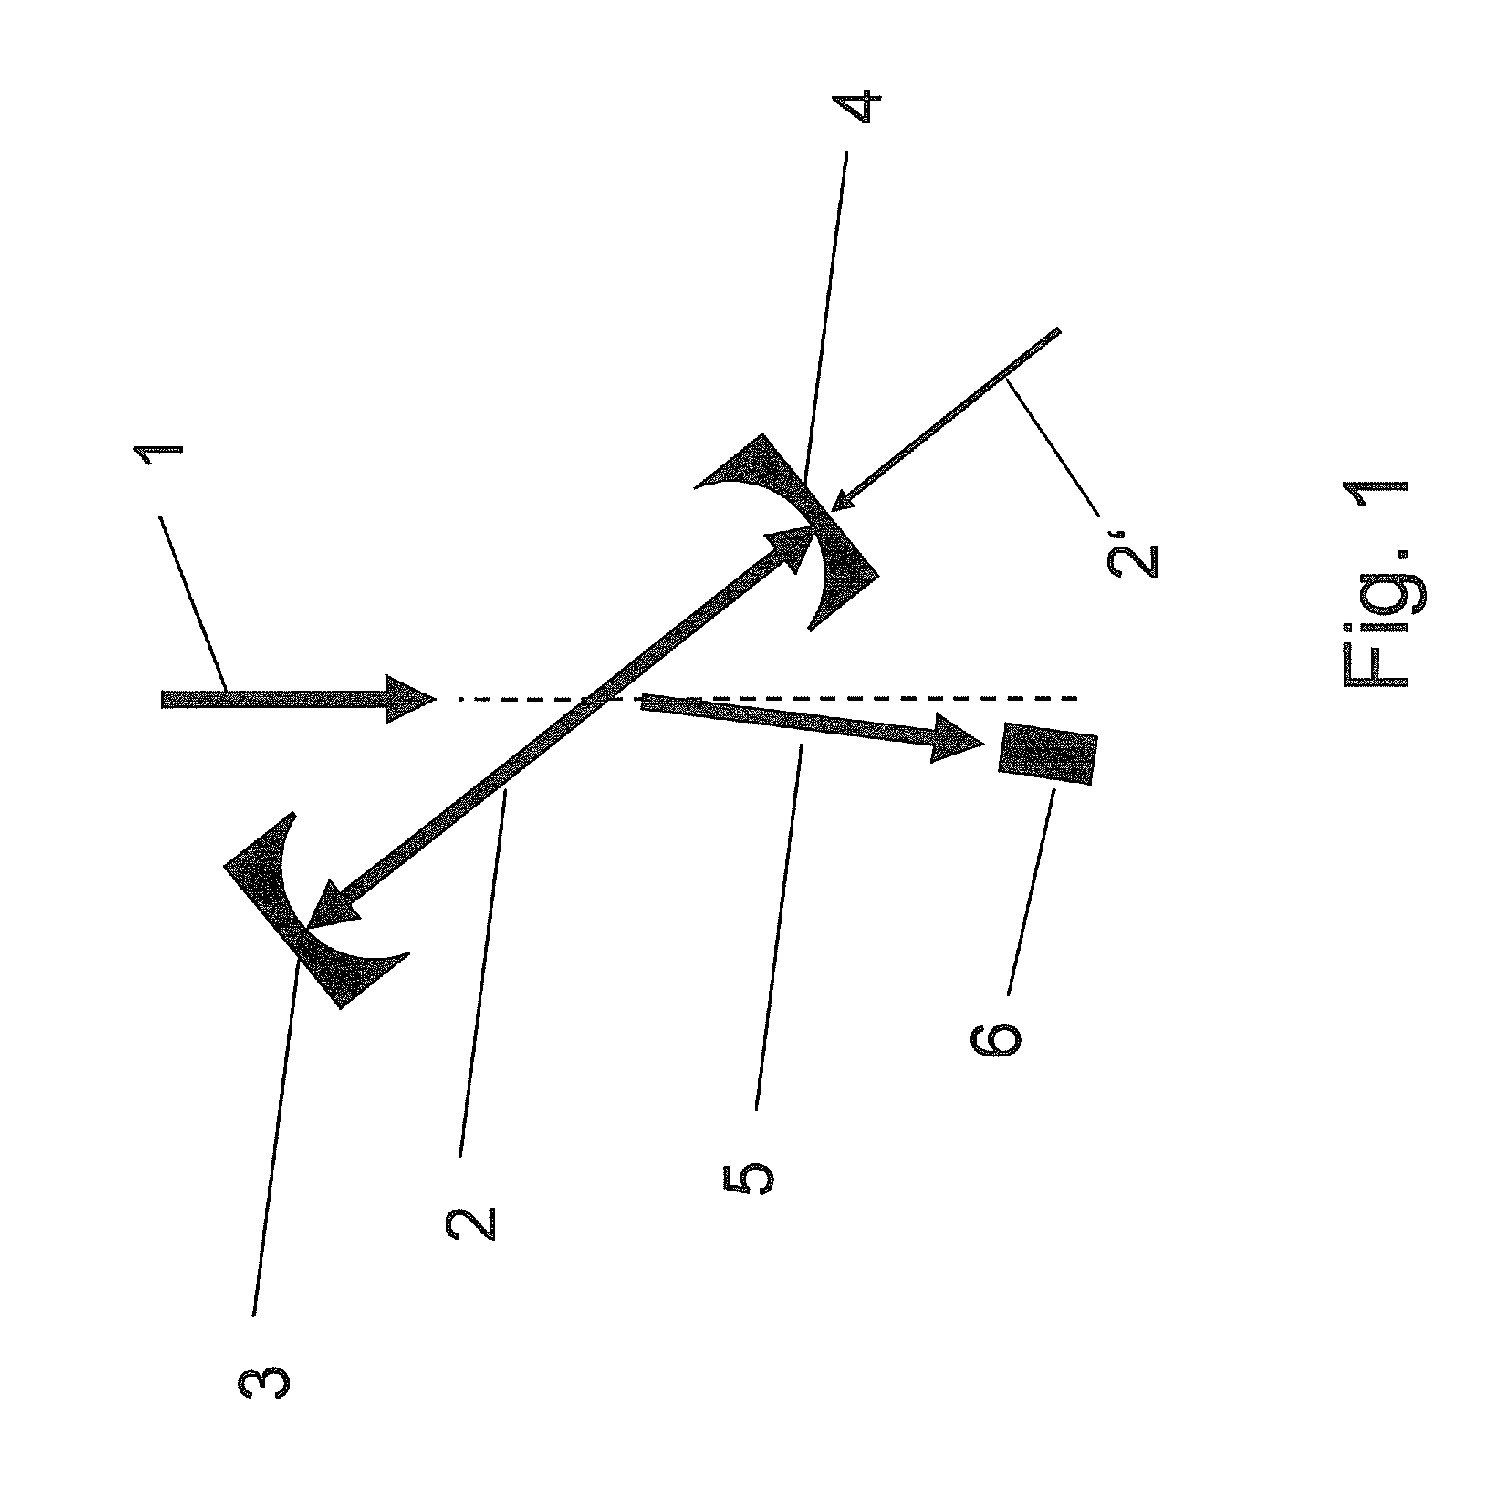 Method for Producing Isotopes, in particular Method for Producing Radioisotopes by Means of Gamma-Beam Irradiation